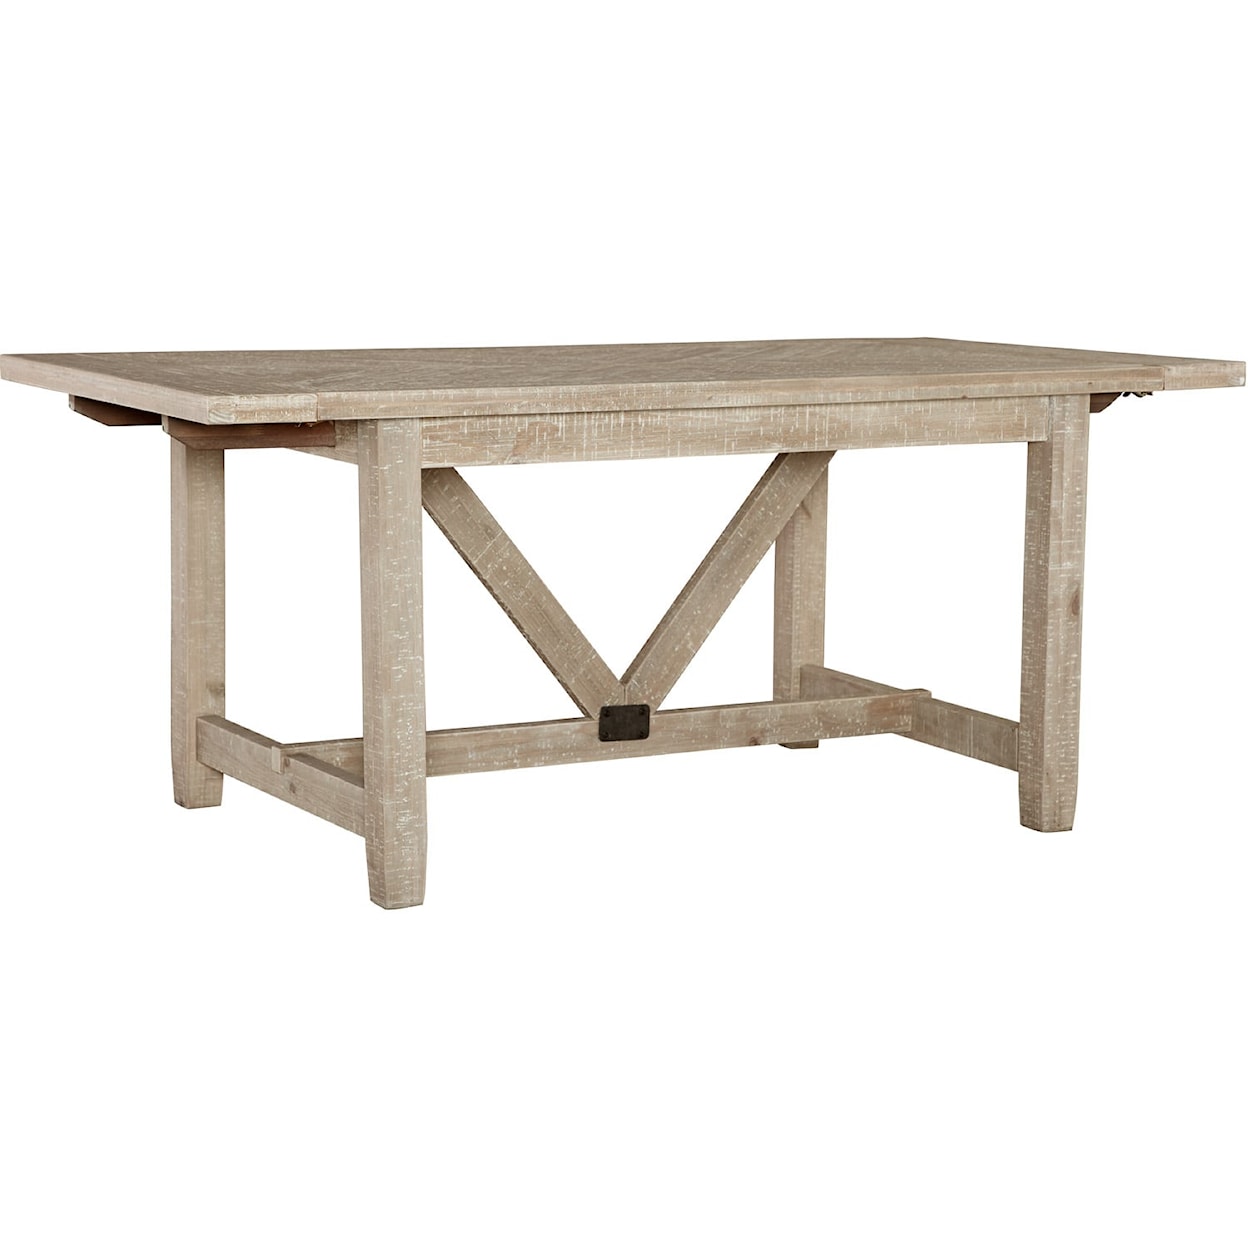 Aspenhome Foundry Extendable Dining Table